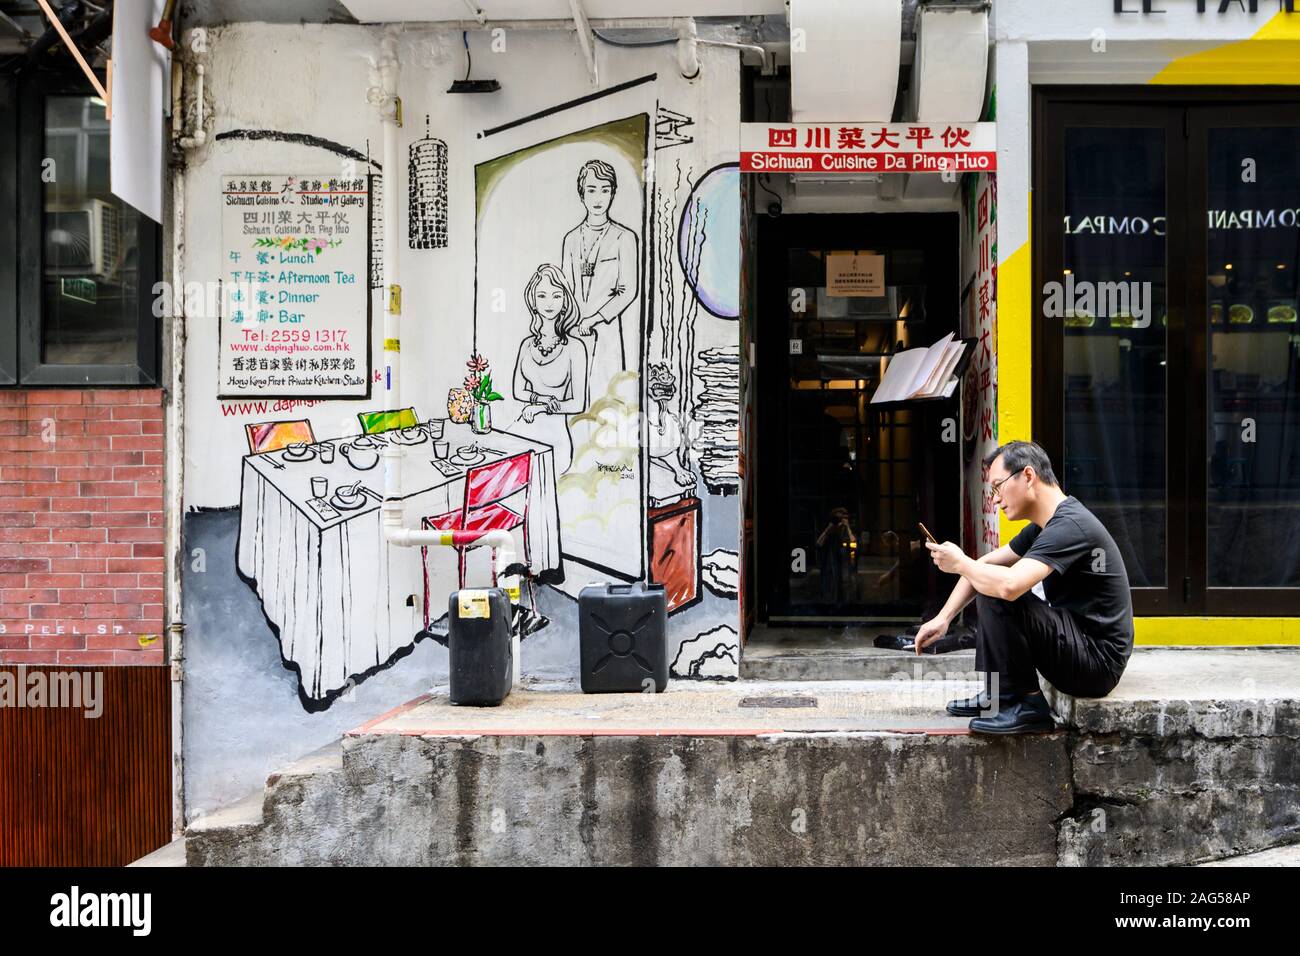 'Street art on the facade of the restaurant Da Ping Huo  in Central District of Hong Kong.' Stock Photo